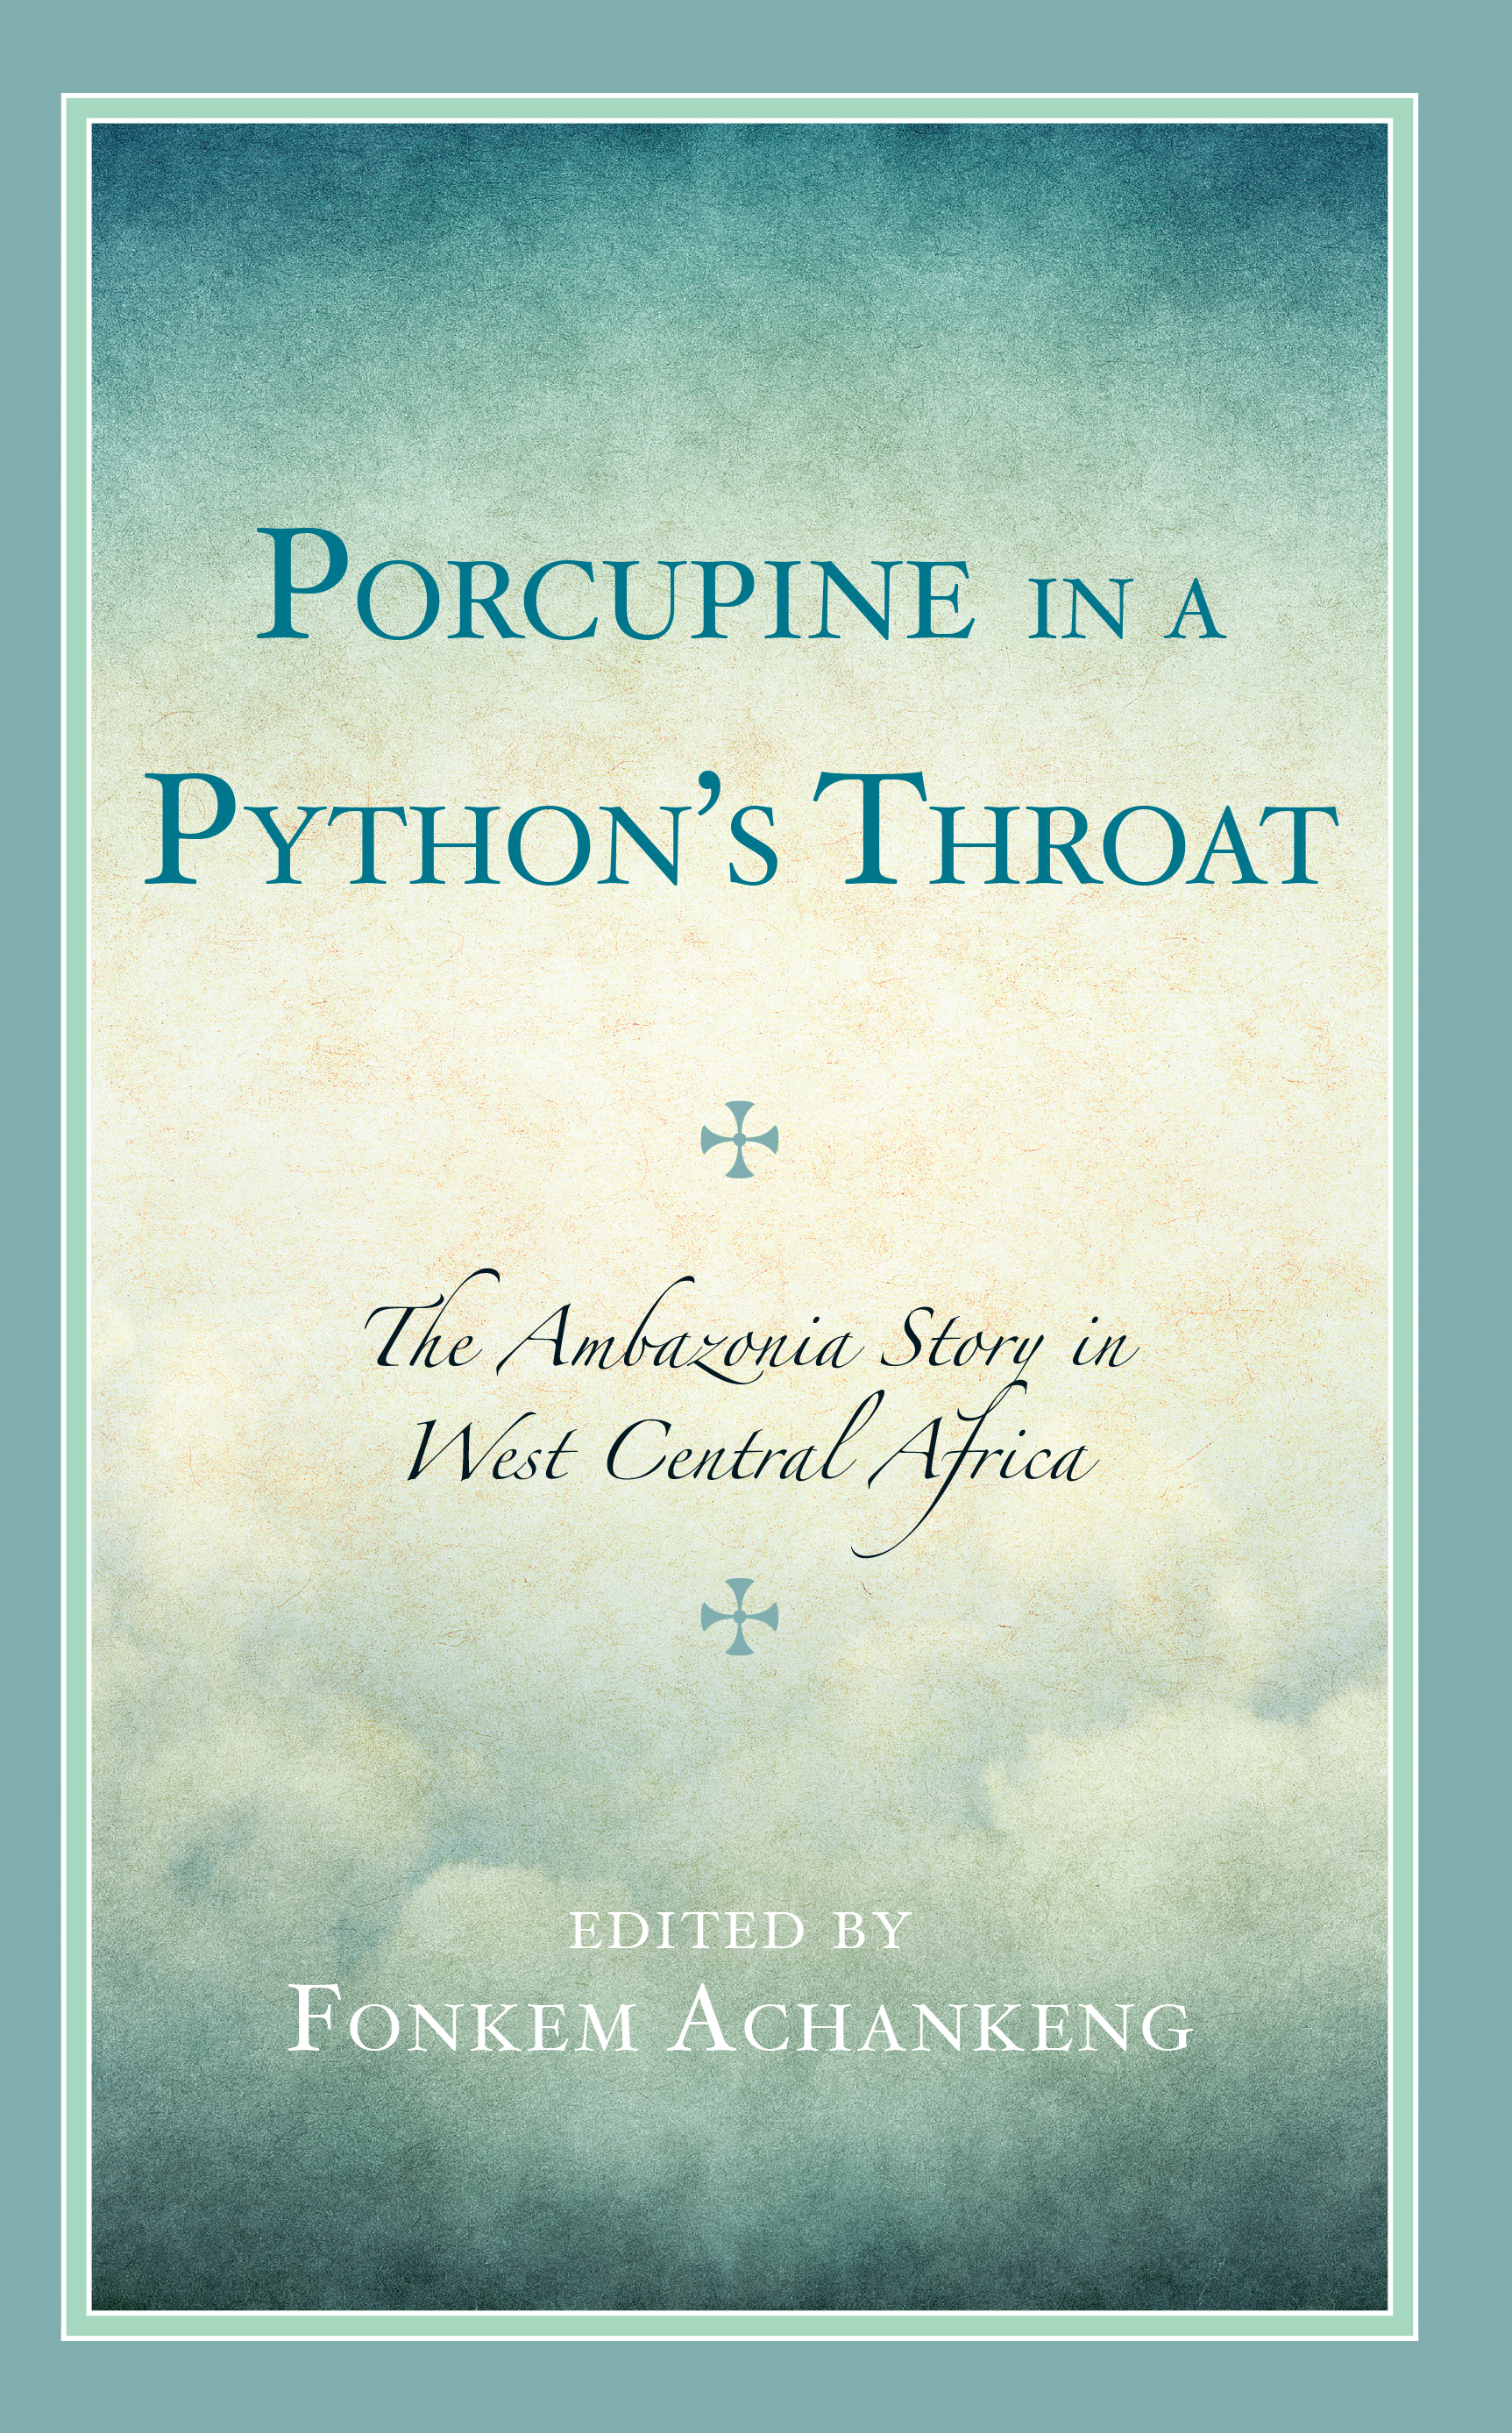 Porcupine in a Python’s Throat: The Ambazonia Story in West Central Africa